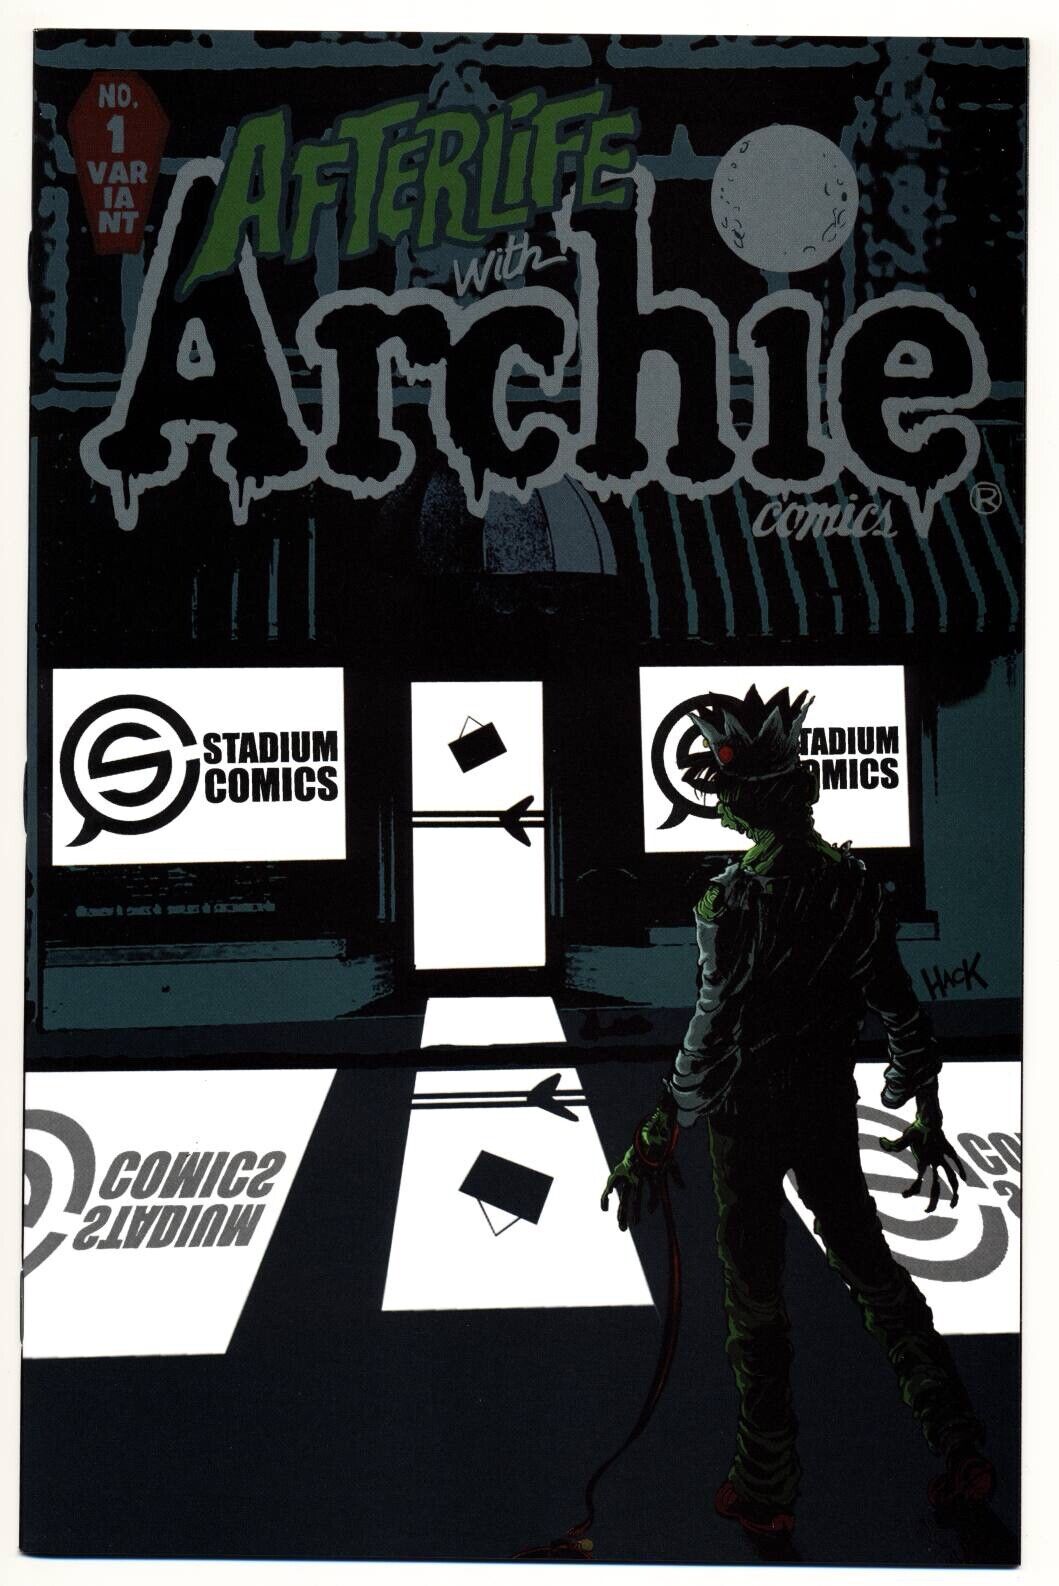 AFTERLIFE WITH ARCHIE #1 NM, Stadium Variant, Archie Comics 2013 Stock Image